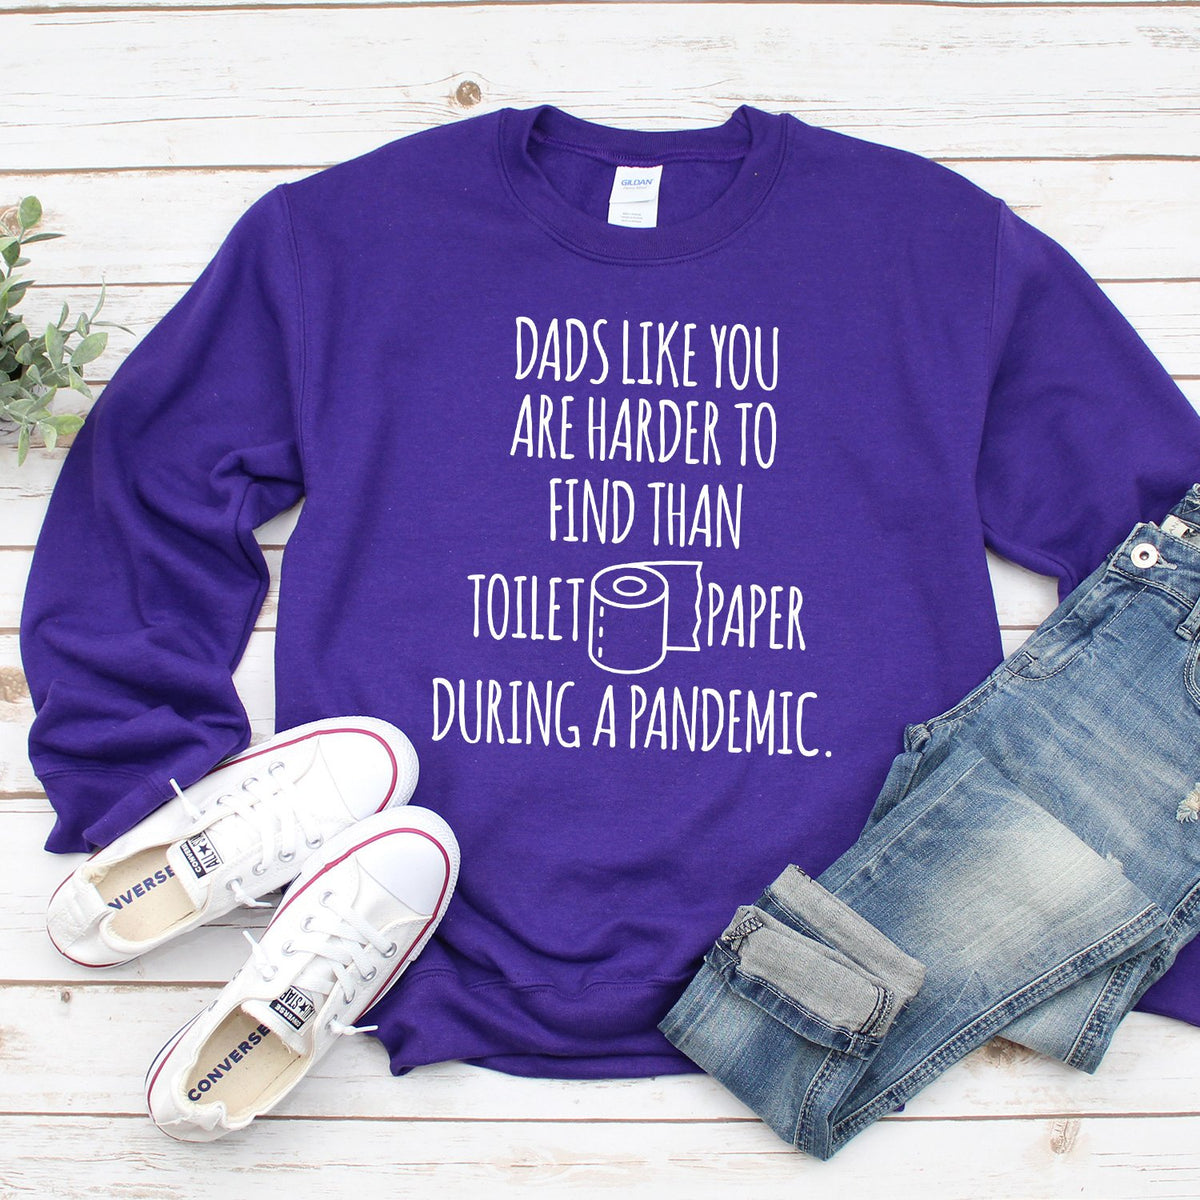 Dads Like You Are Harder to Find Than Toilet Paper During A Pandemic - Long Sleeve Heavy Crewneck Sweatshirt